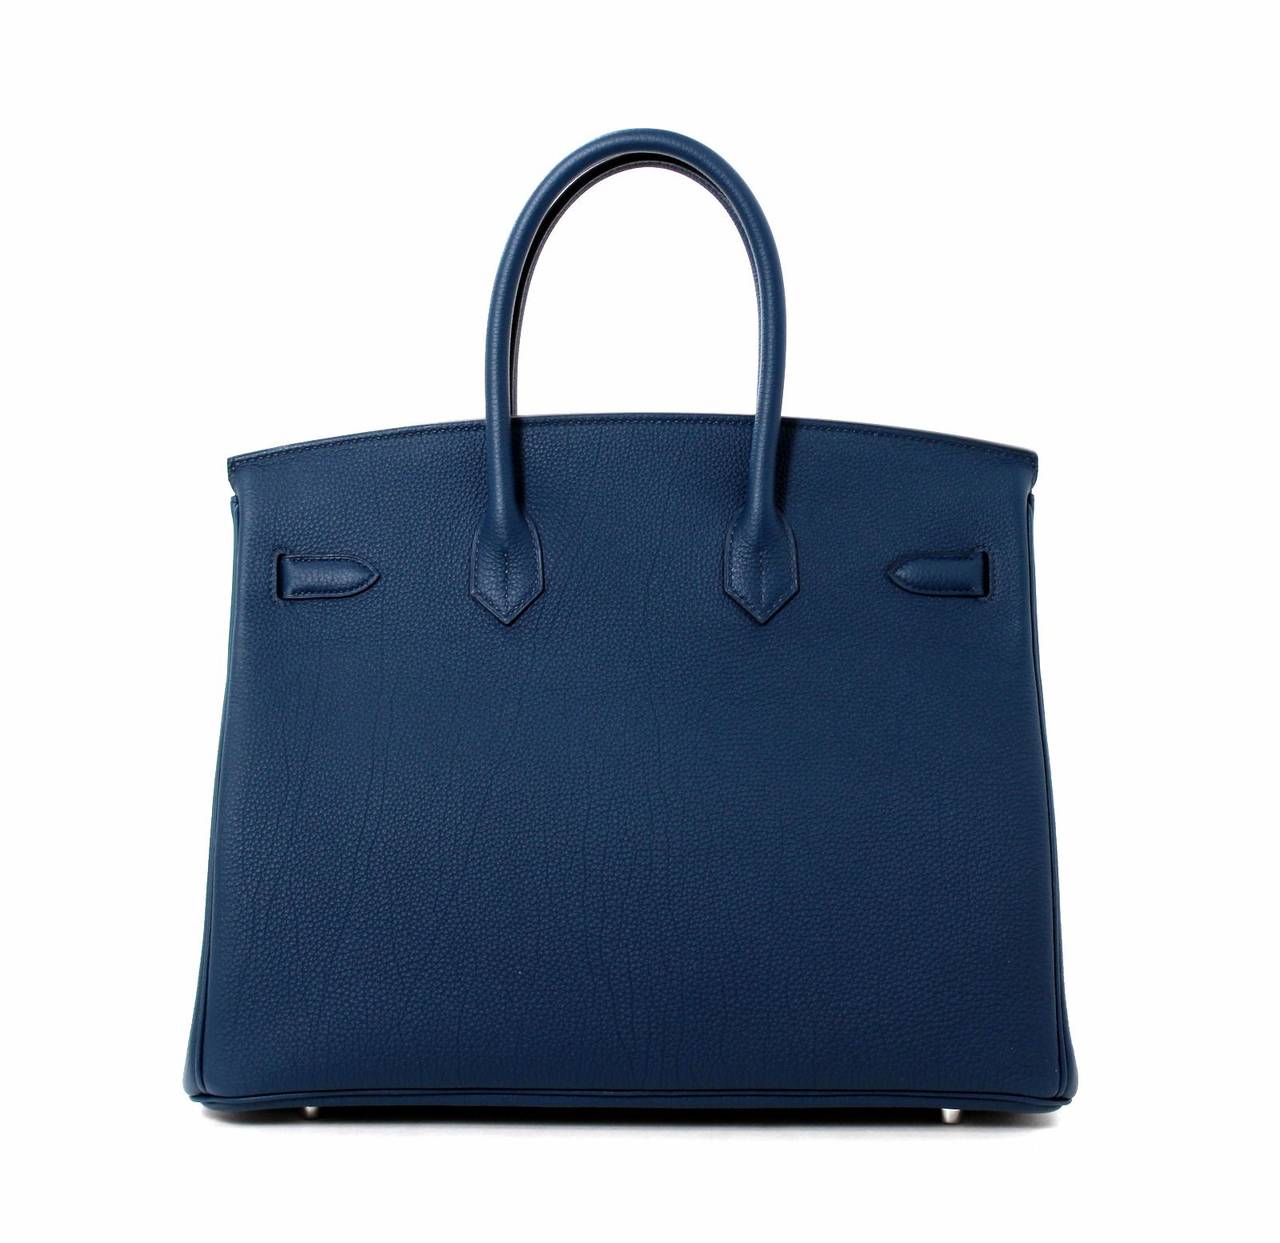 Pristine, store fresh condition (plastic on hardware) Hermès Birkin Bag in Bleu de Prusse Togo Leather with Palladium Hardware, 35 cm size.   
Crafted by hand and considered by many as the epitome of luxury items, Birkins are extremely difficult